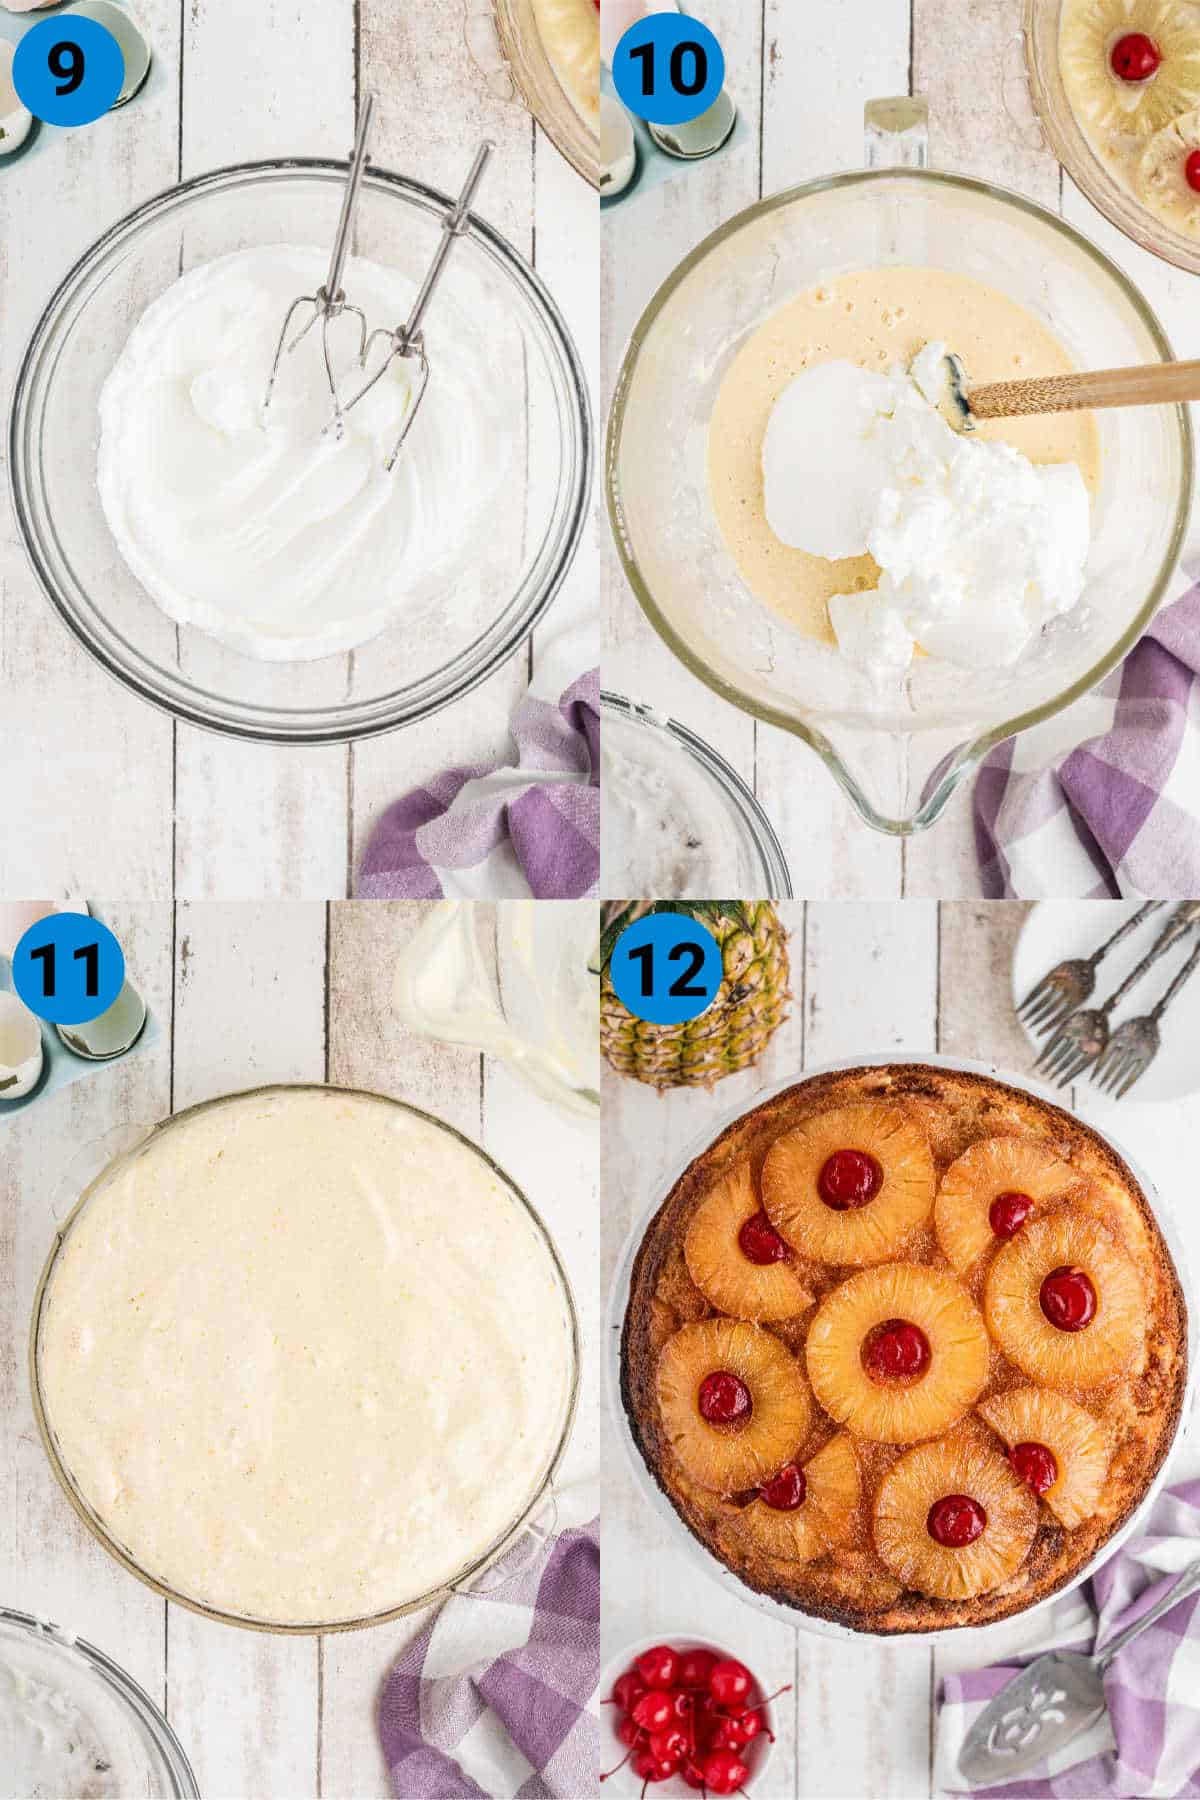 A collage of four images showing how to make a pineapple upside down cake recipe steps 9-12.